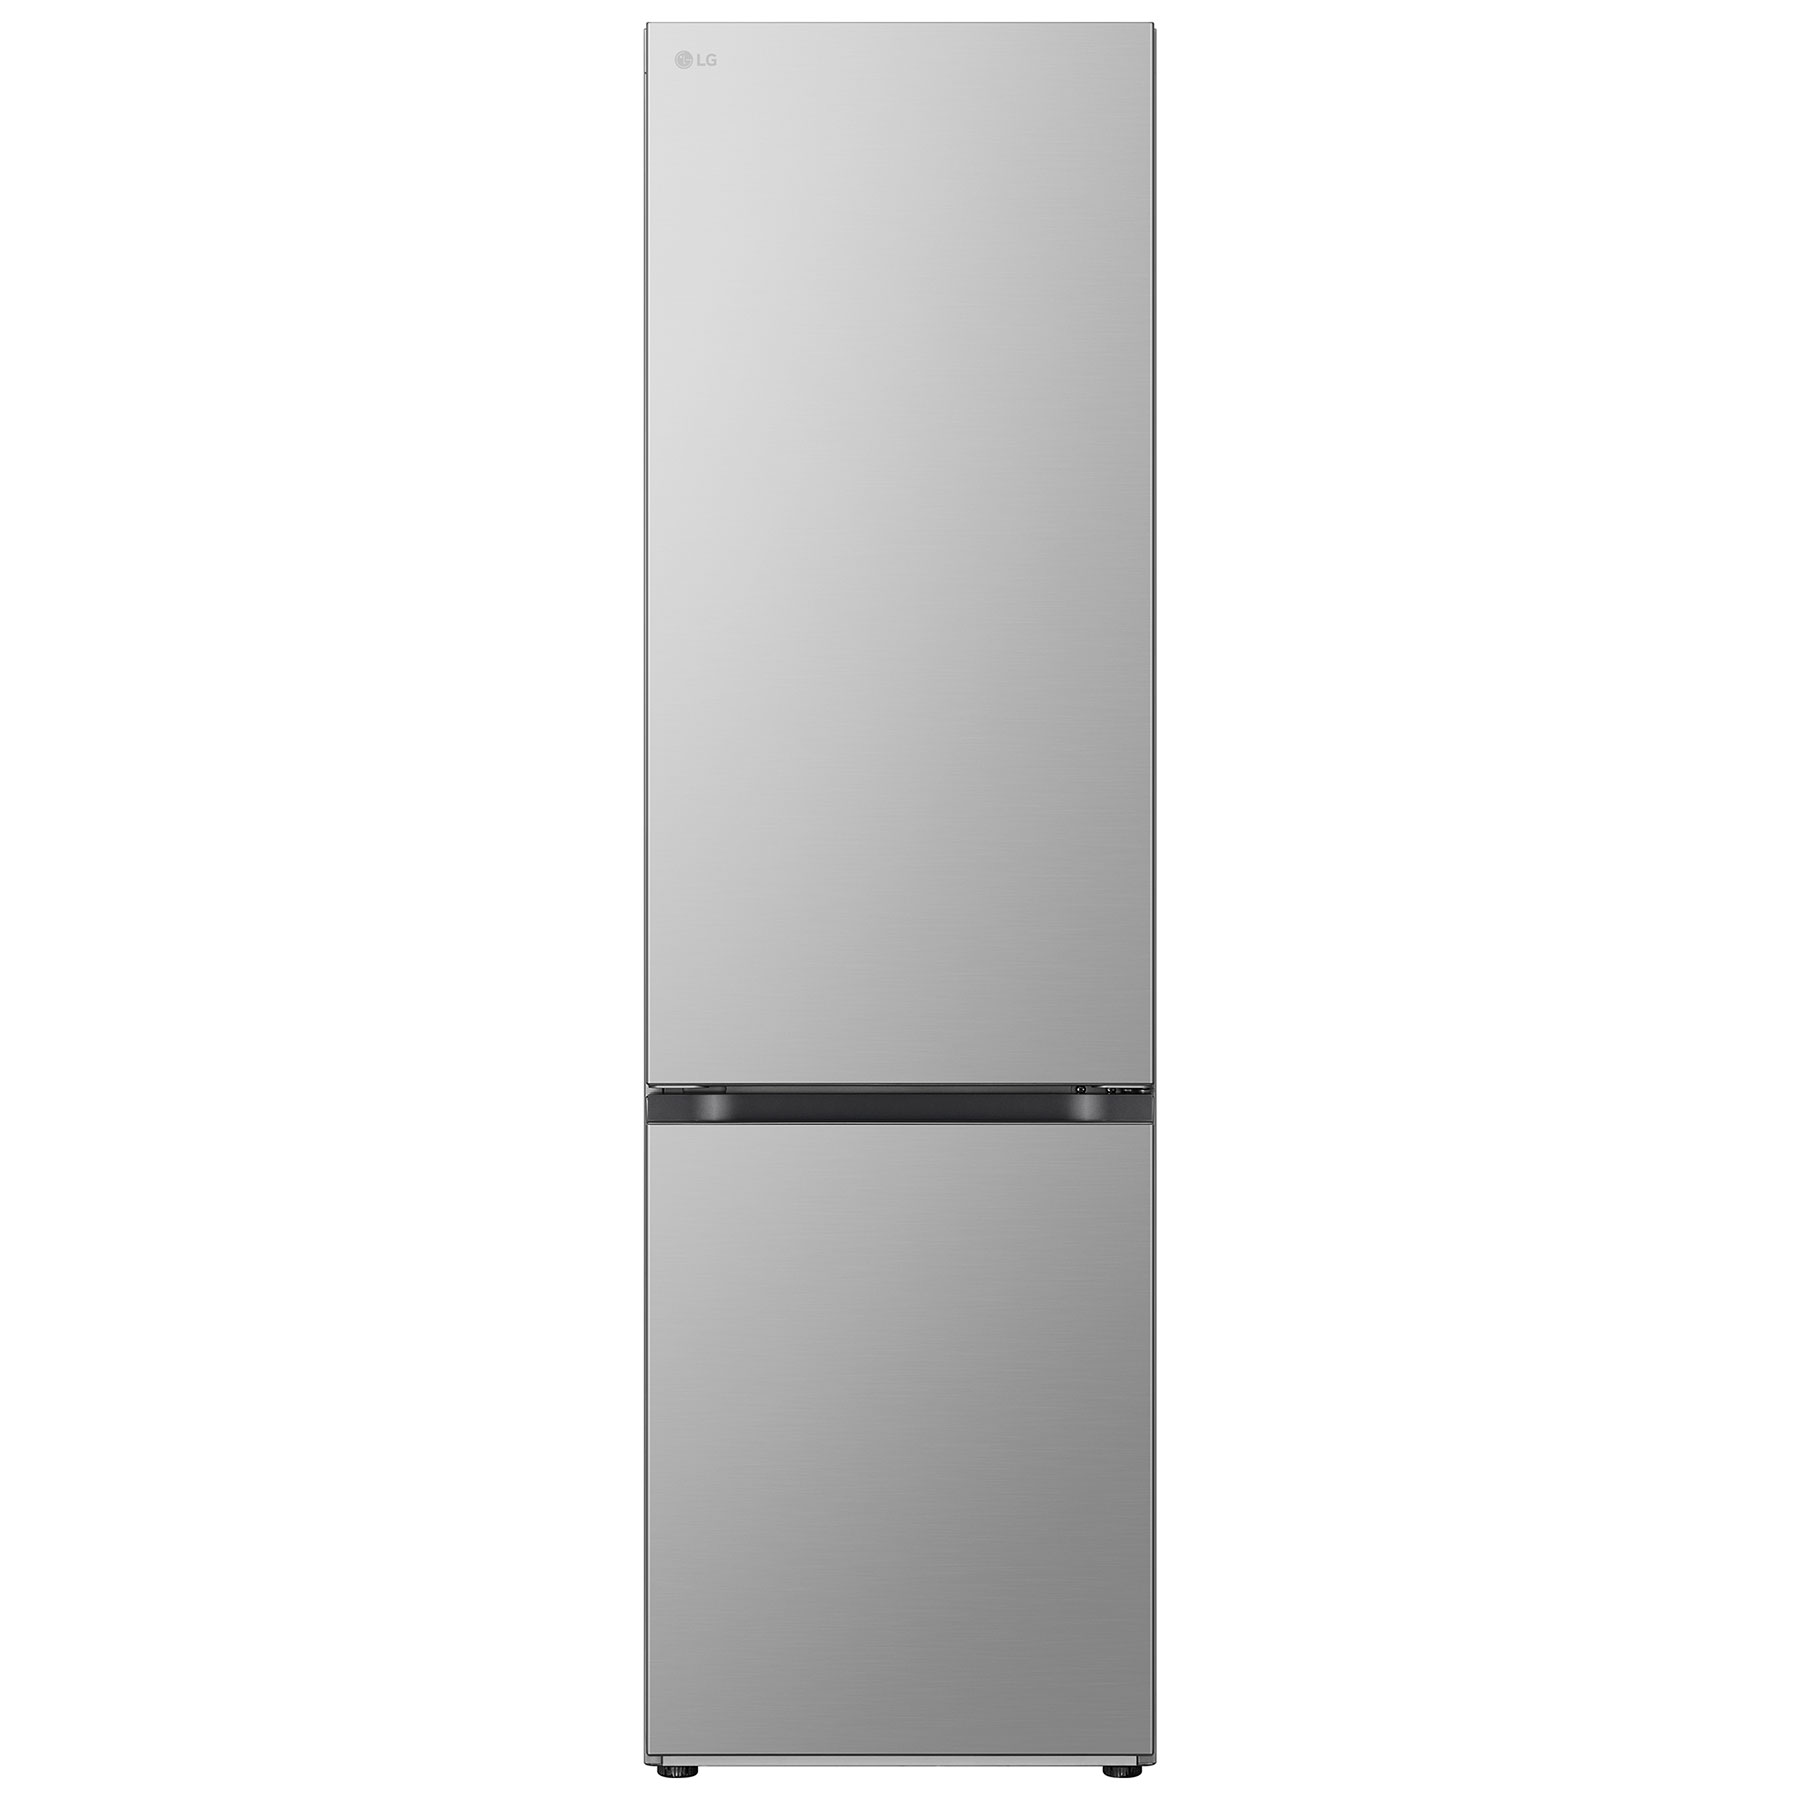 Image of LG GBV3200CPY 60cm Frost Free Fridge Freezer in Silver 2 03m C Rated